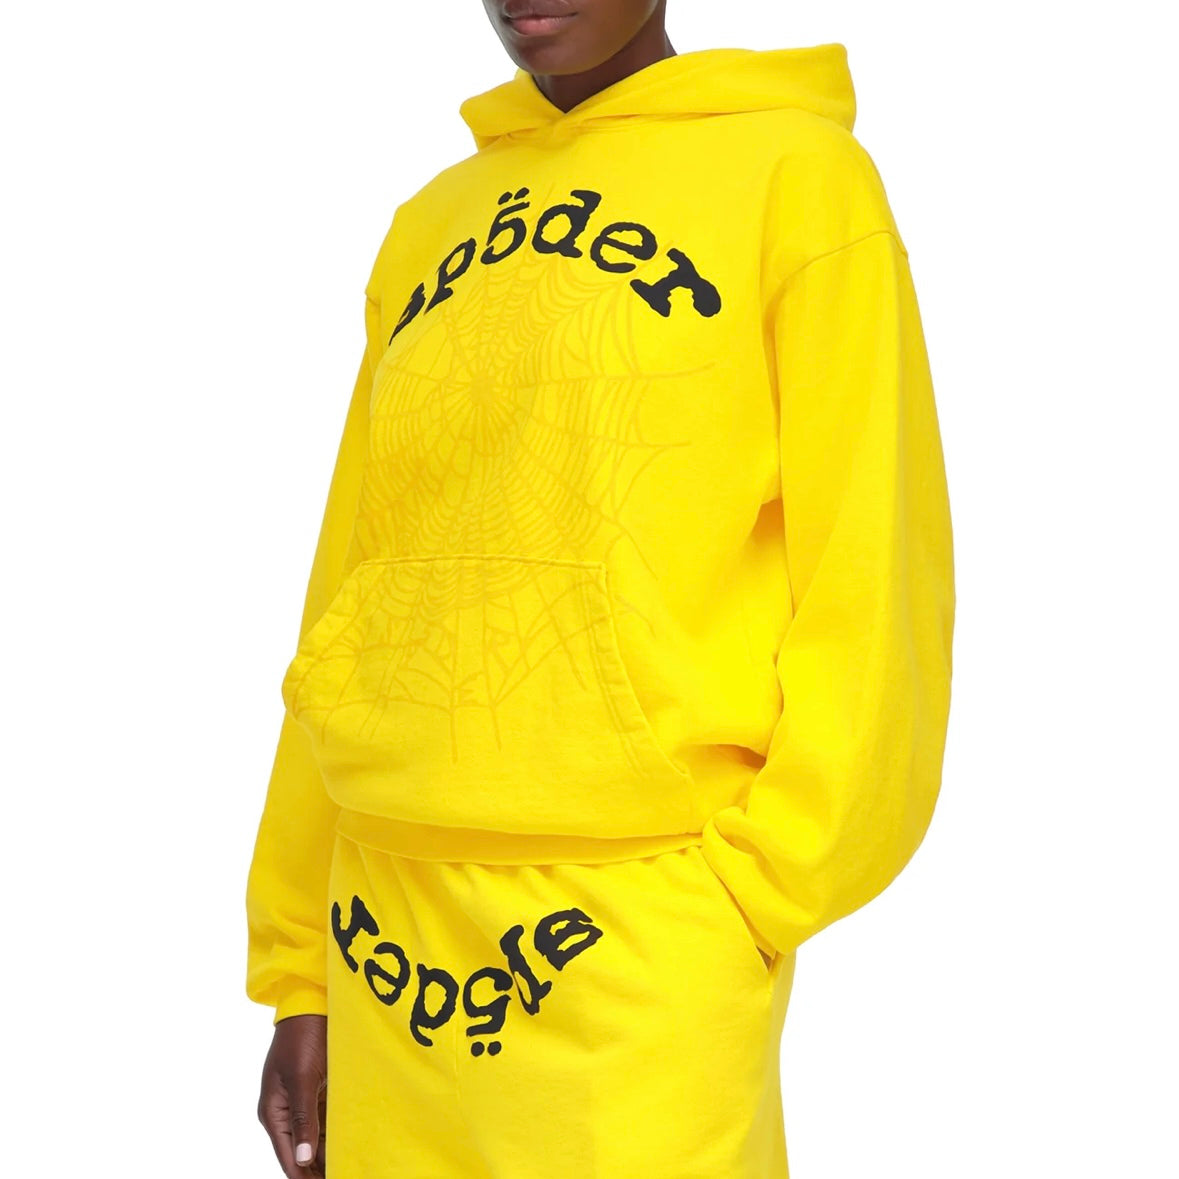 Sp5der Yellow Black Legacy Hoodie On Body Front Left Female